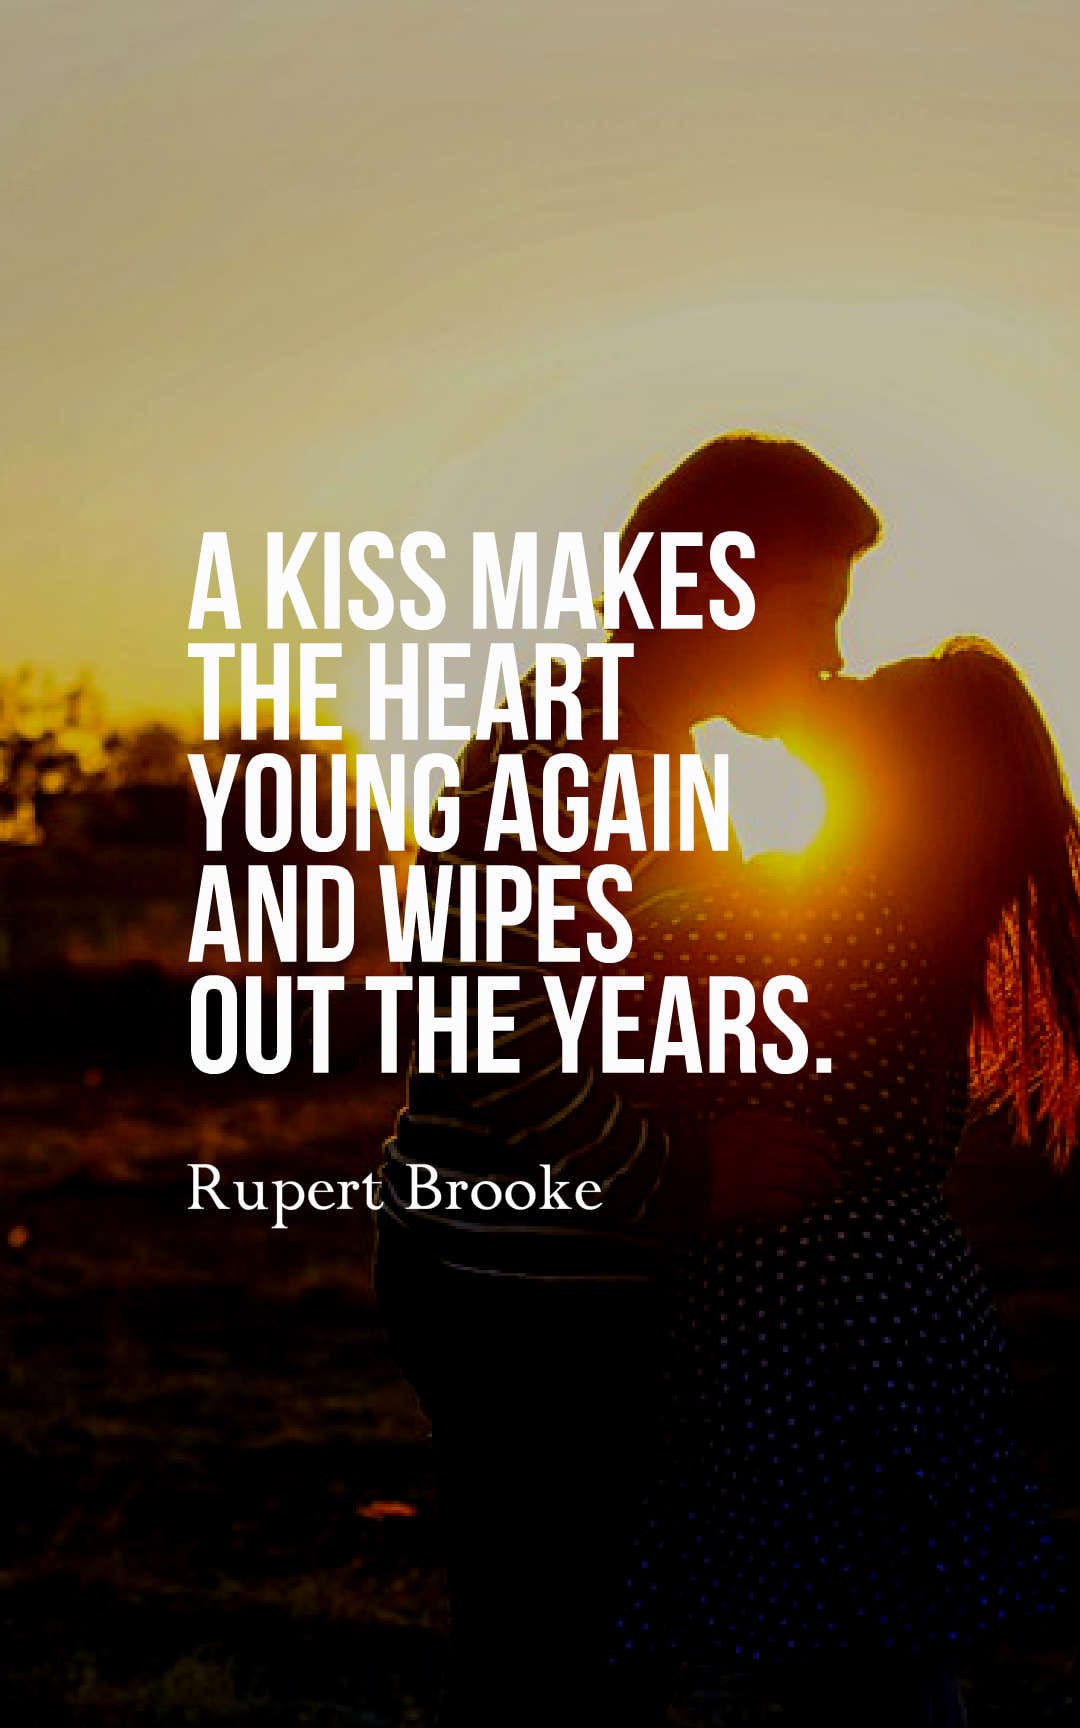 A kiss makes the heart young again and wipes out the years.